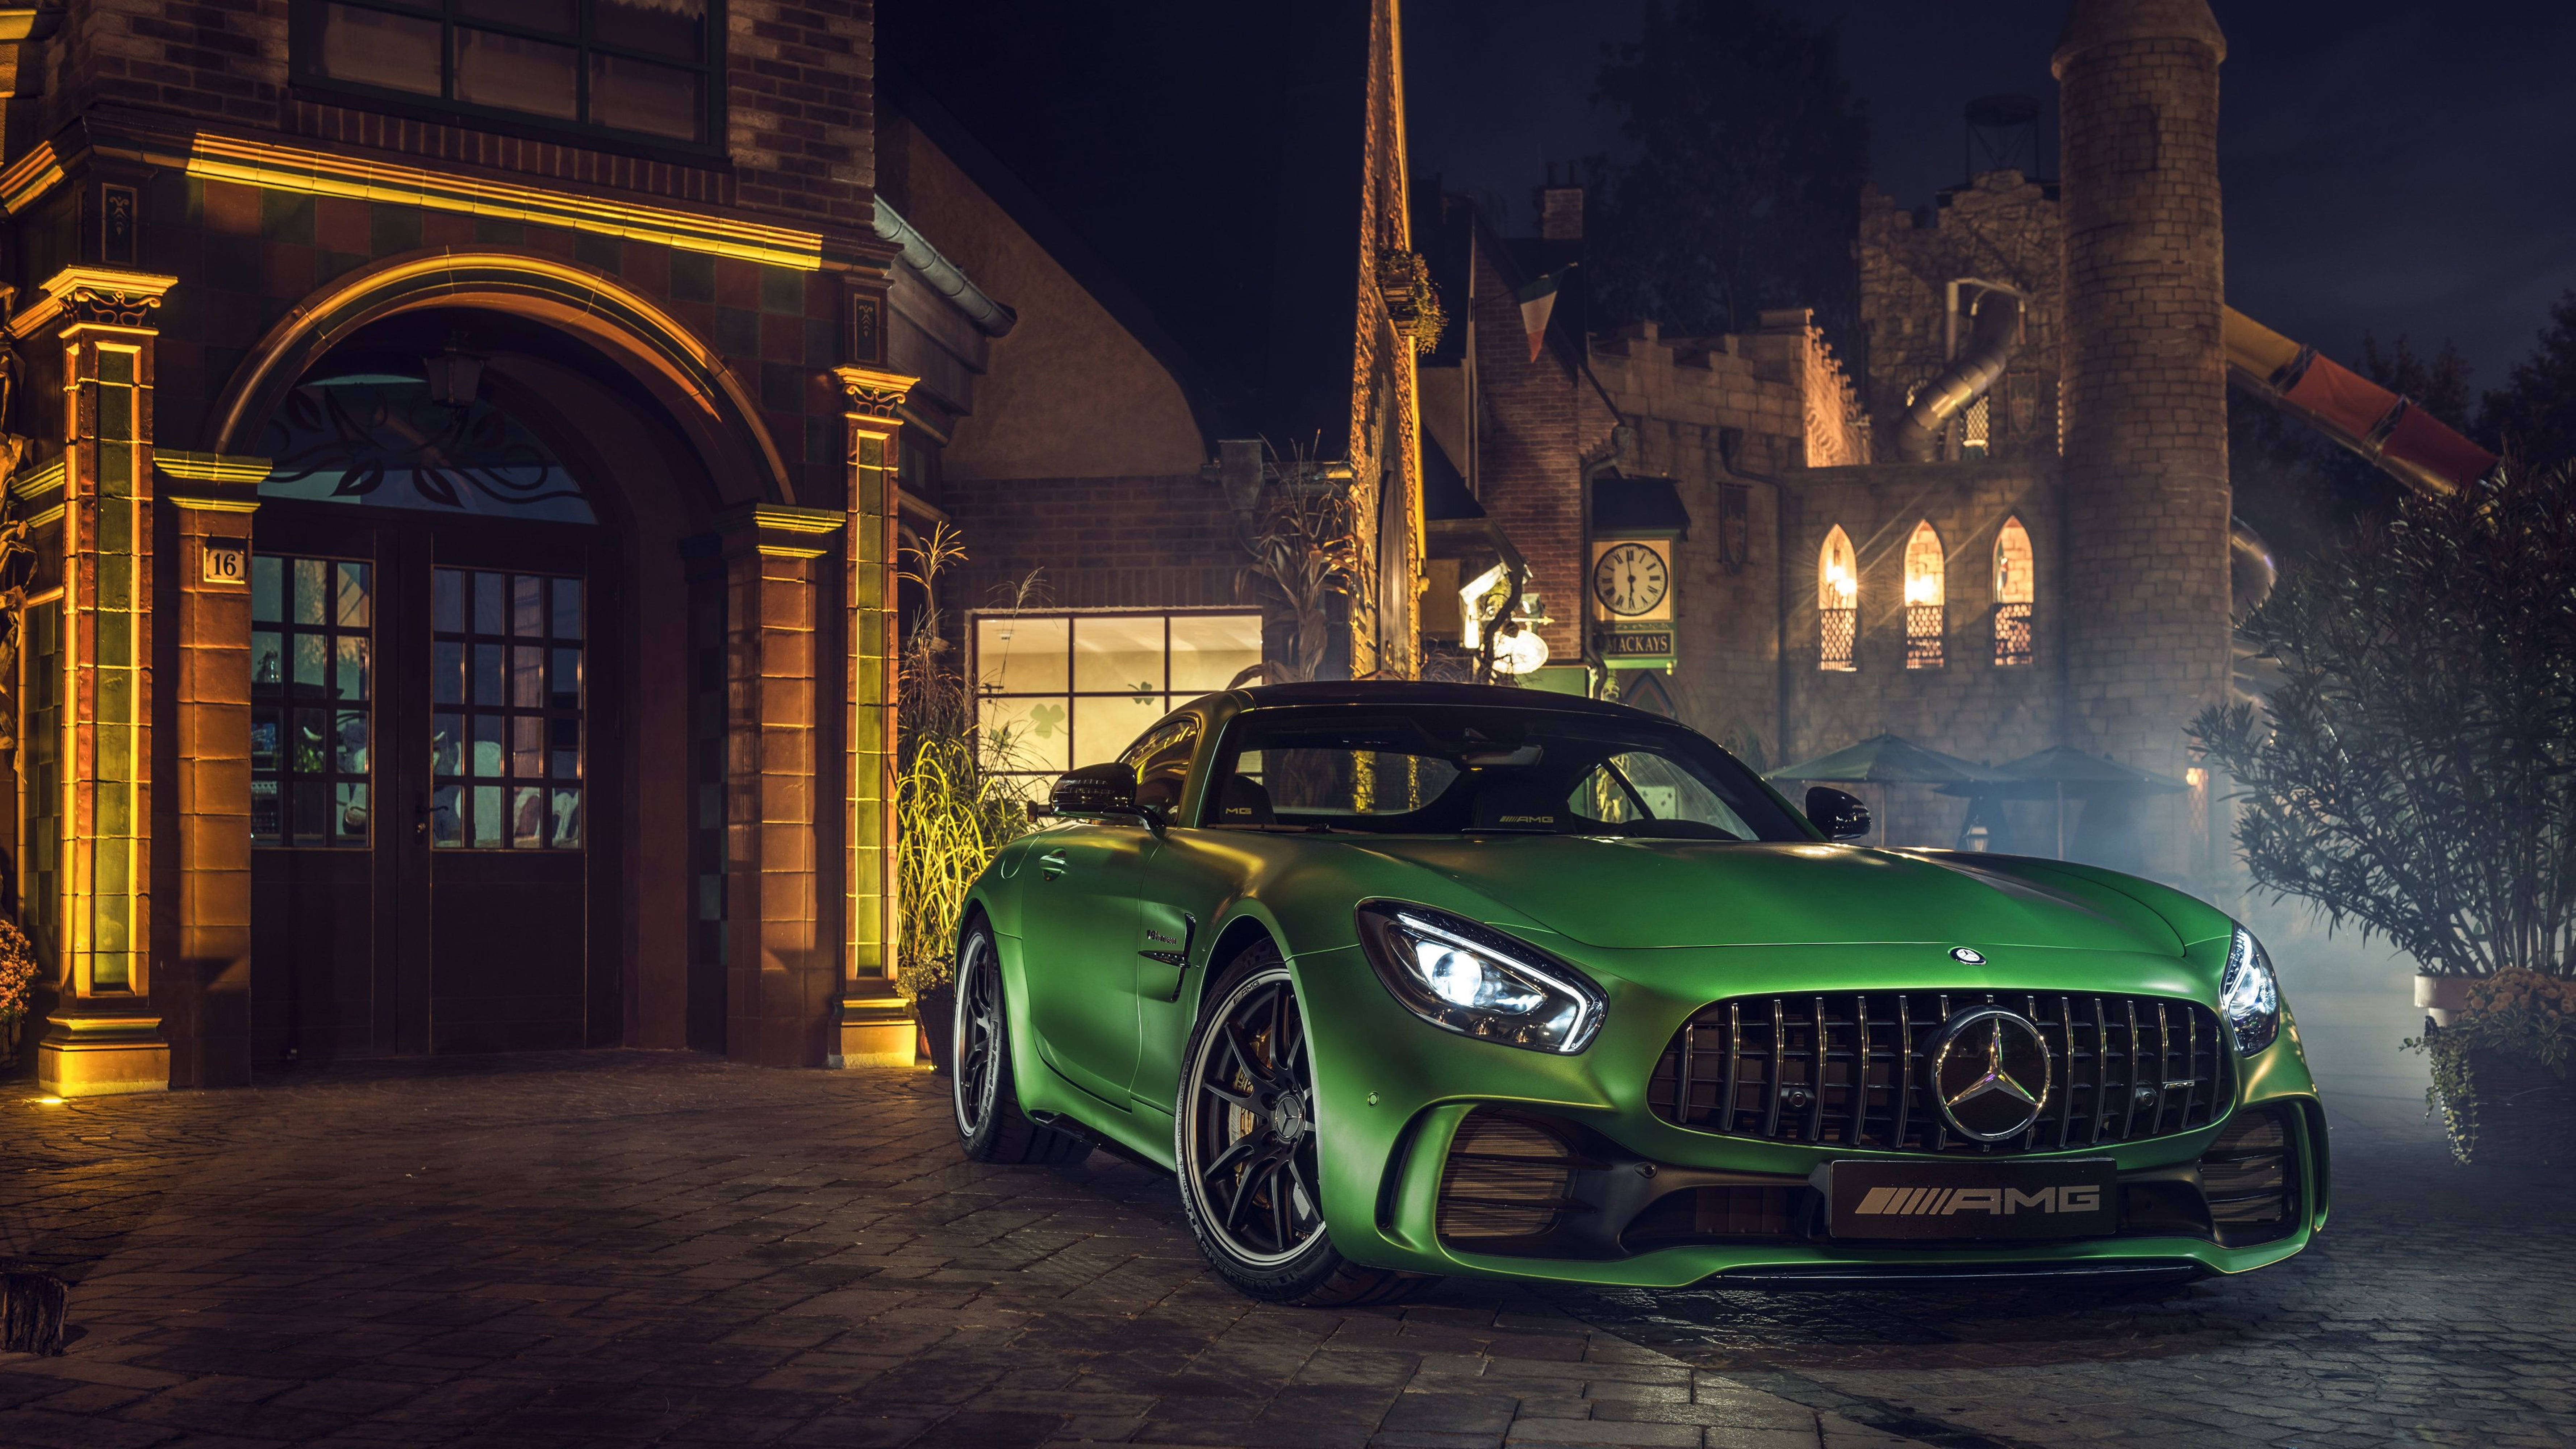 Caption: Striking Elegance - A Mercedes-amg In A Captivating Green Hue Standing Outside A Modernistic Building.